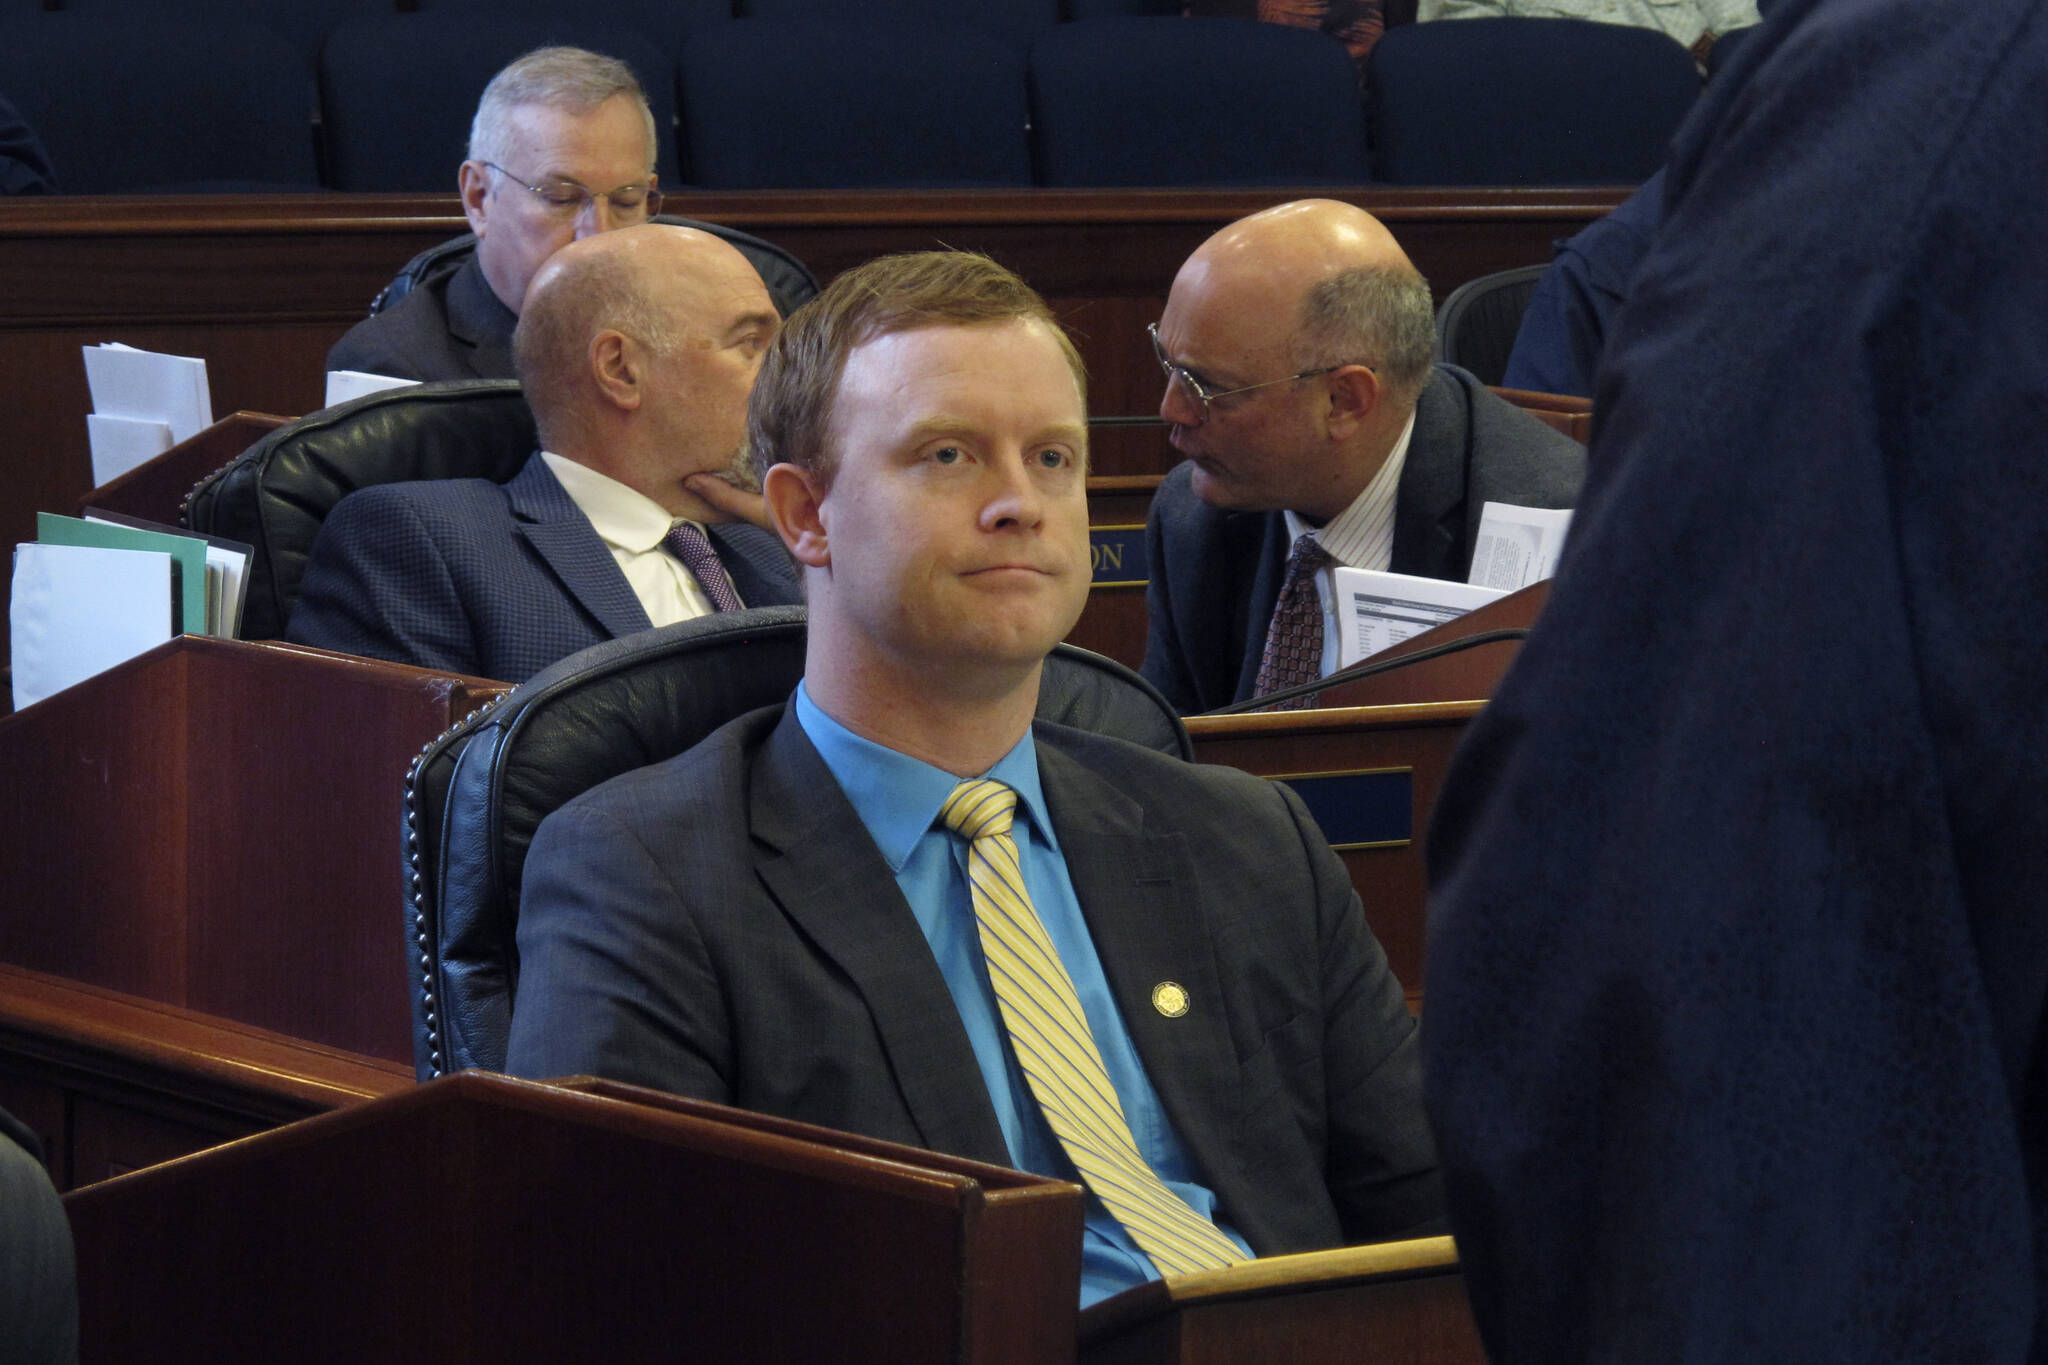 Alaska state Rep. David Eastman, a Wasilla Republican, is shown seated on the House floor on Friday, April 29, 2022, in Juneau, Alaska. Minority House Republicans removed Eastman from their caucus, with the minority leader citing a buildup of issues over time. (AP Photo/Becky Bohrer)